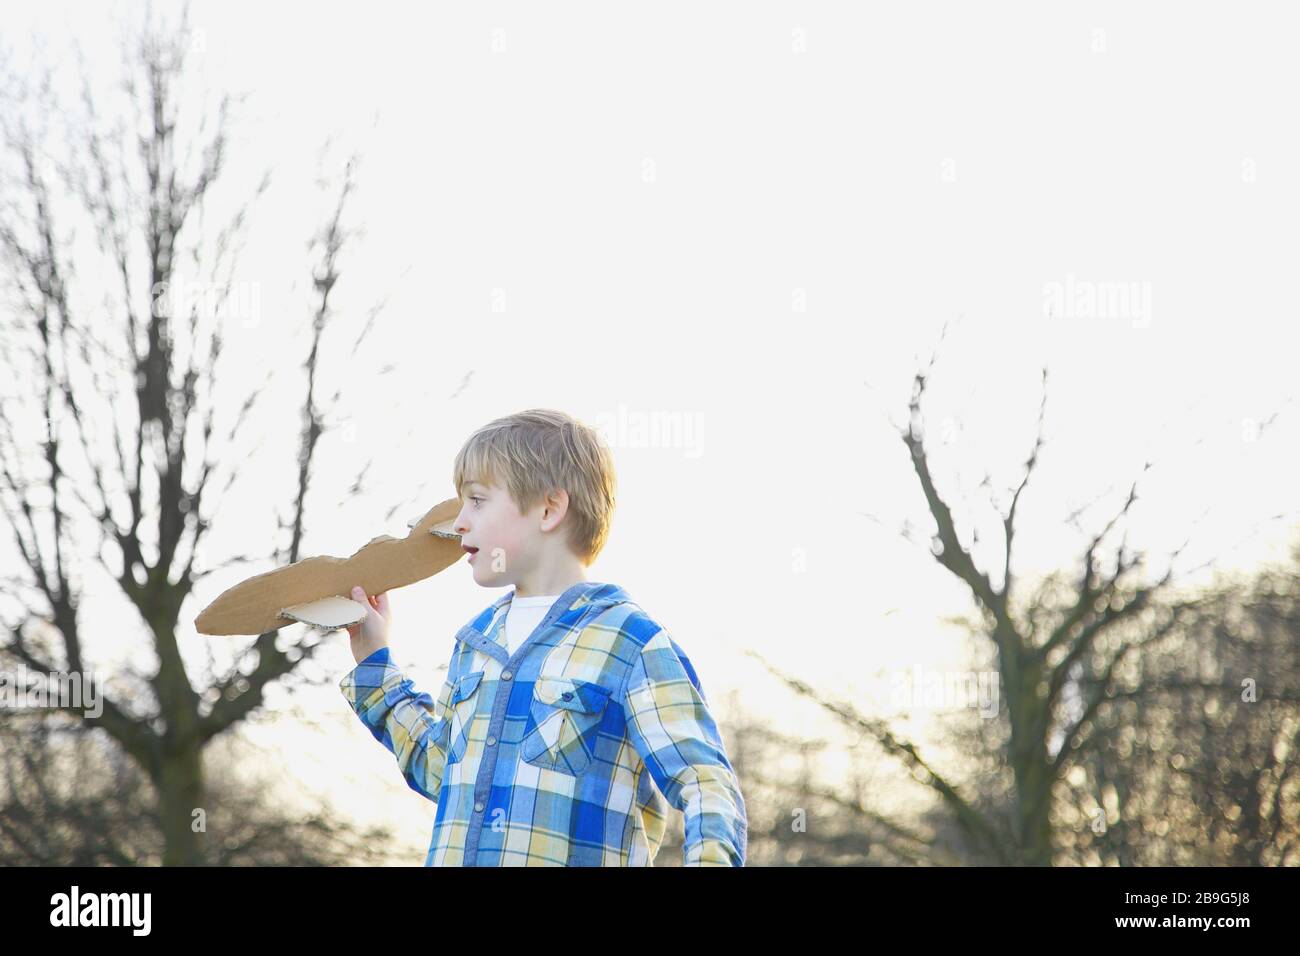 Boy playing with cardboard airplane in park Stock Photo